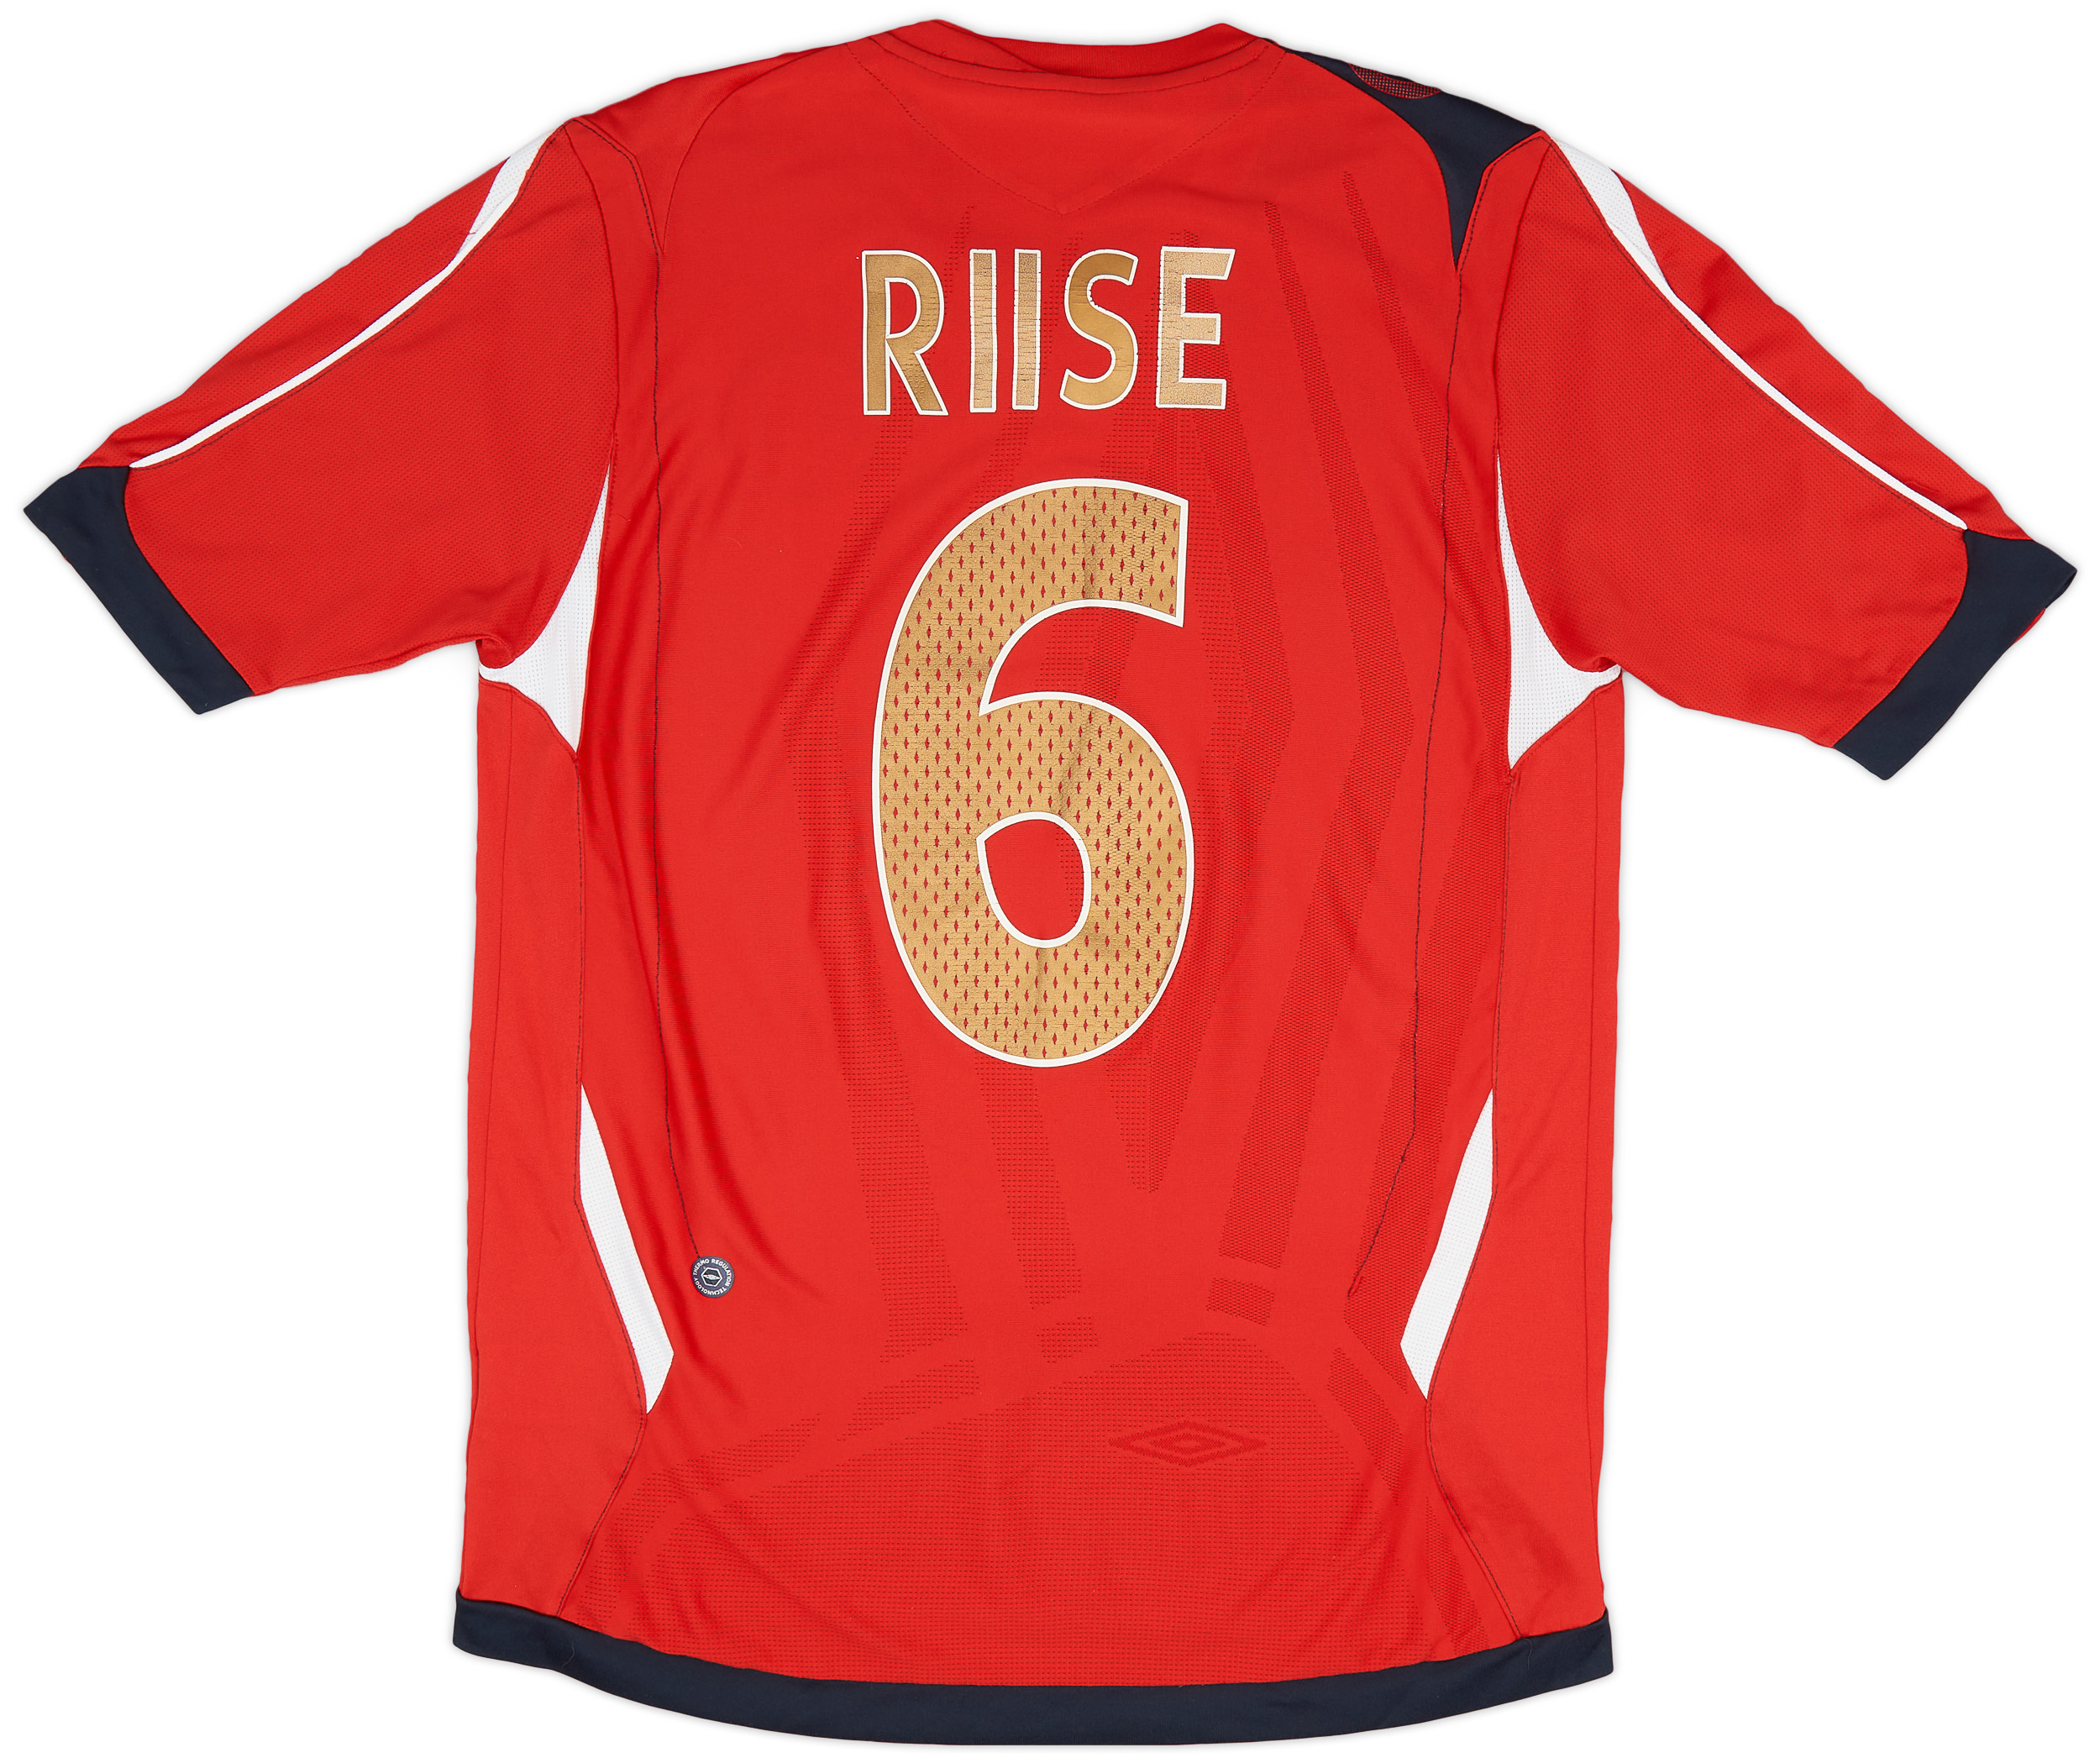 2006-08 Norway Home Shirt Riise #6 - 7/10 - ()